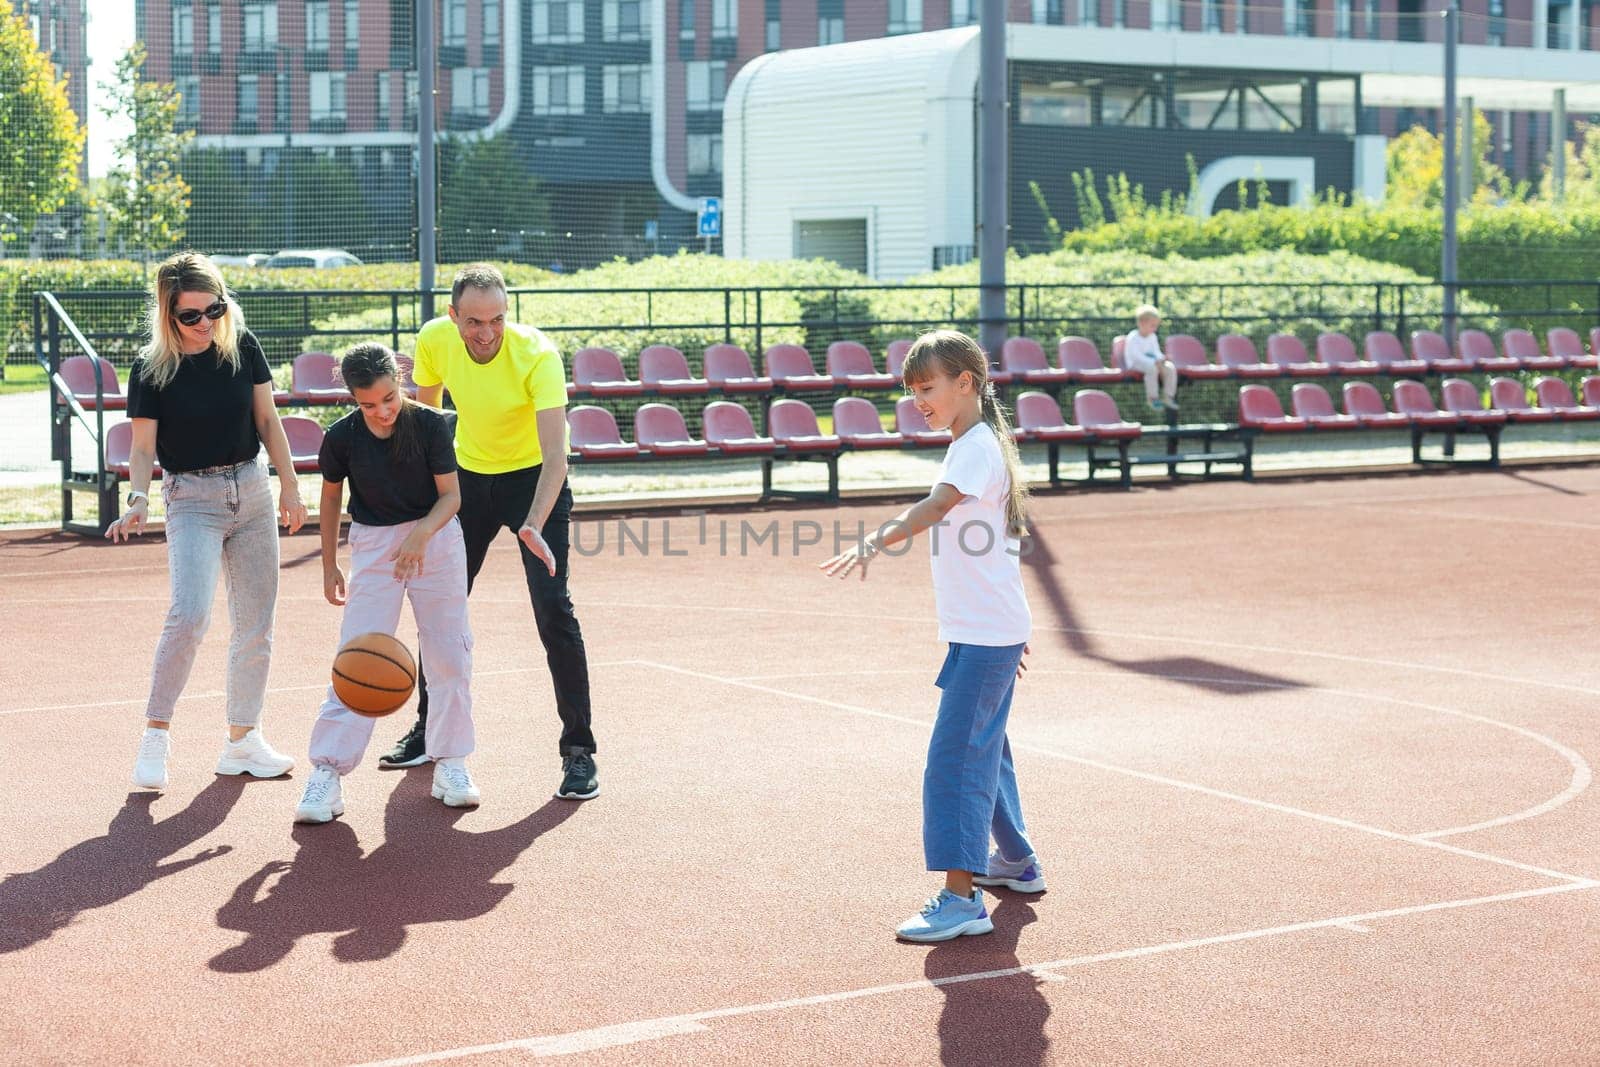 family playing basketball on court. High quality photo